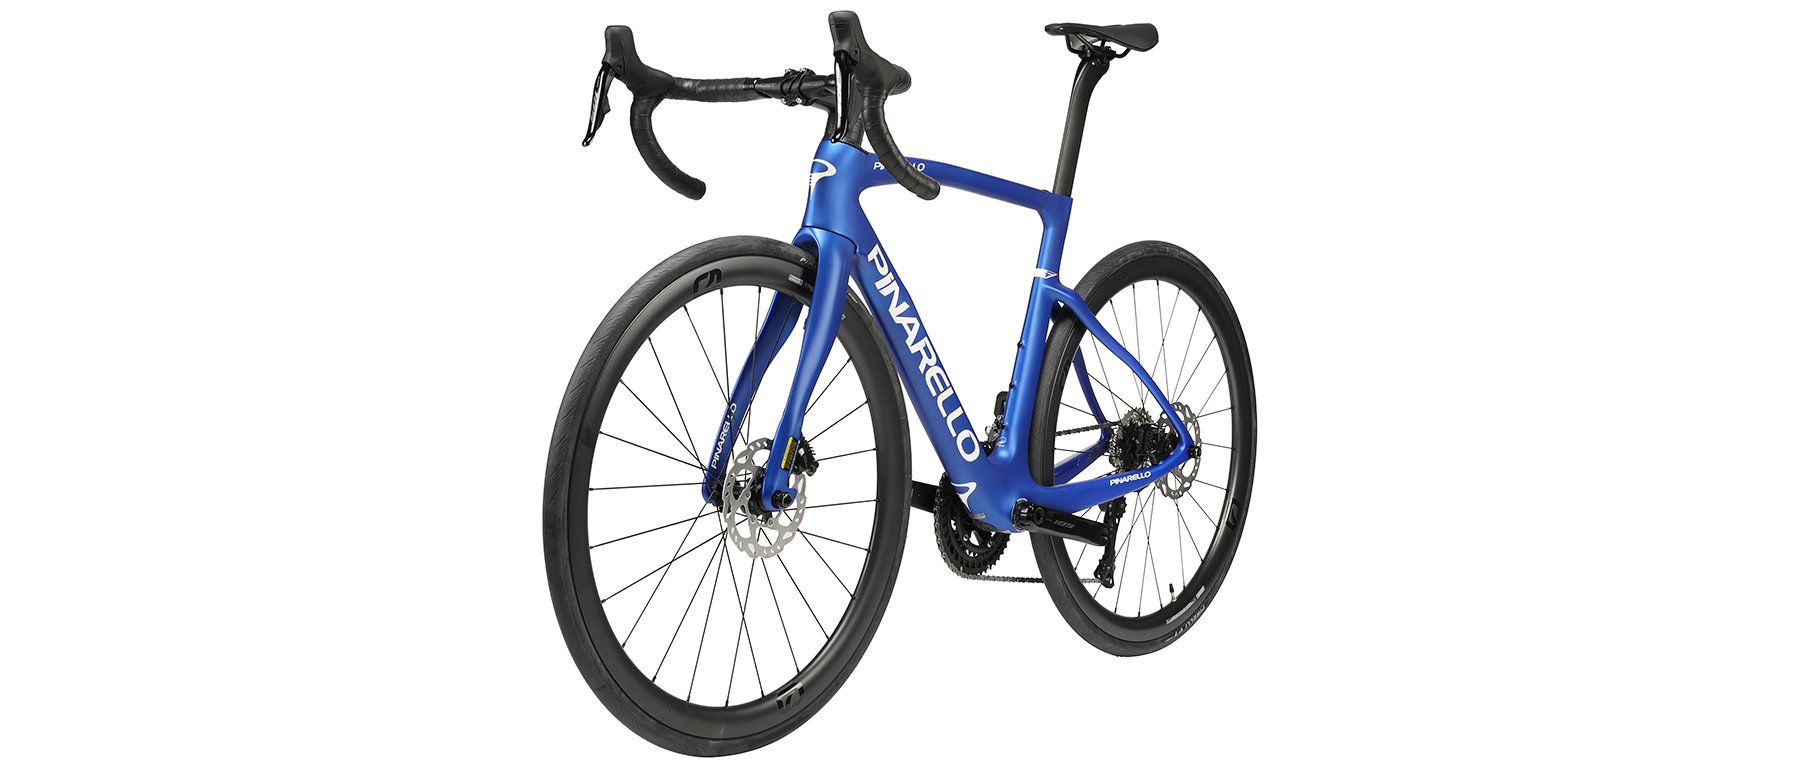 Pinarello F5 105 Di2 R7170 Bicycle (with Carbon Wheelset)